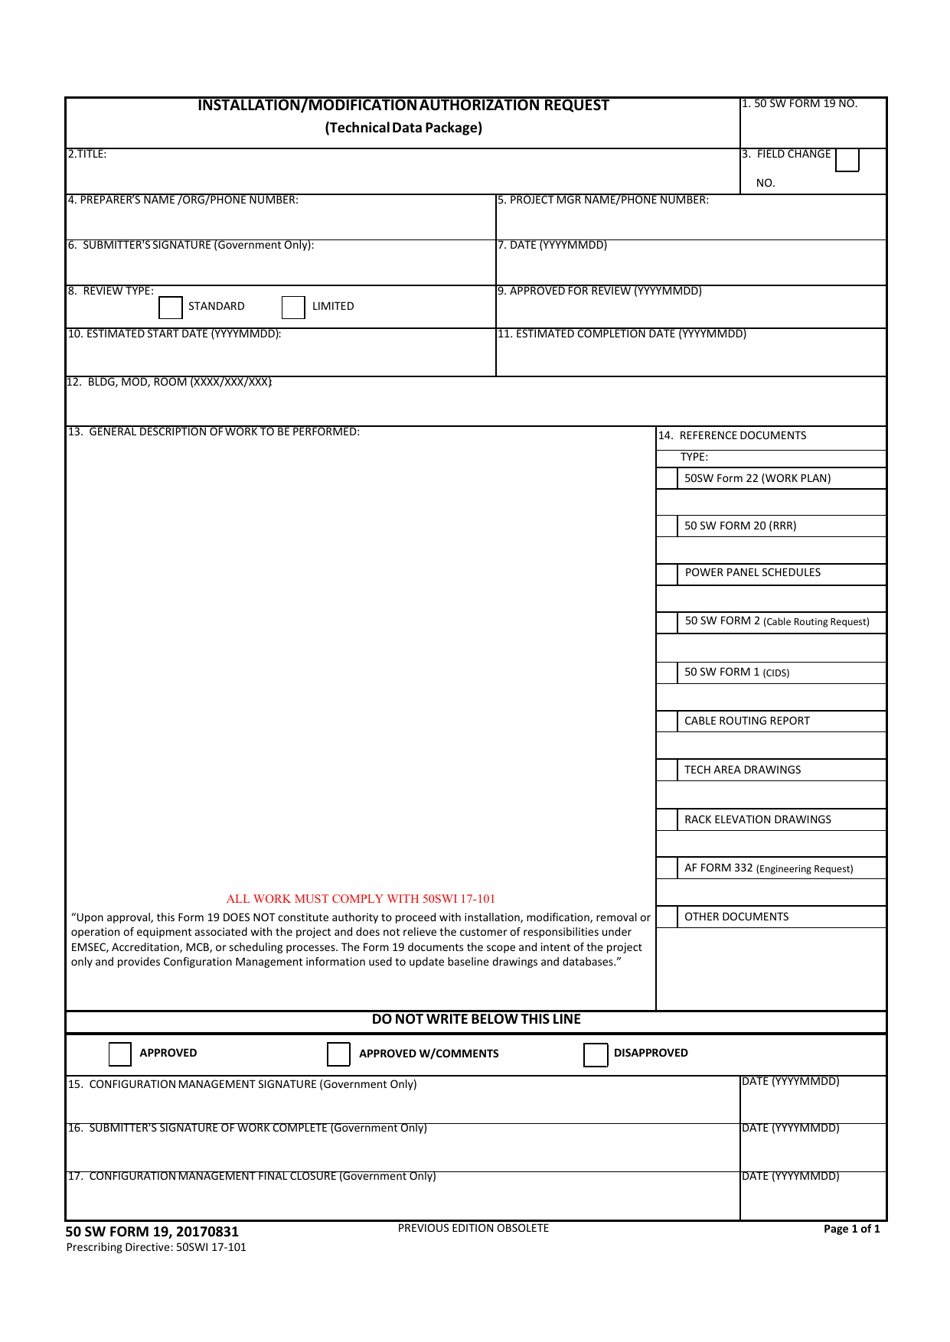 50 SW Form 19 Installation / Modification Authorization Request, Page 1